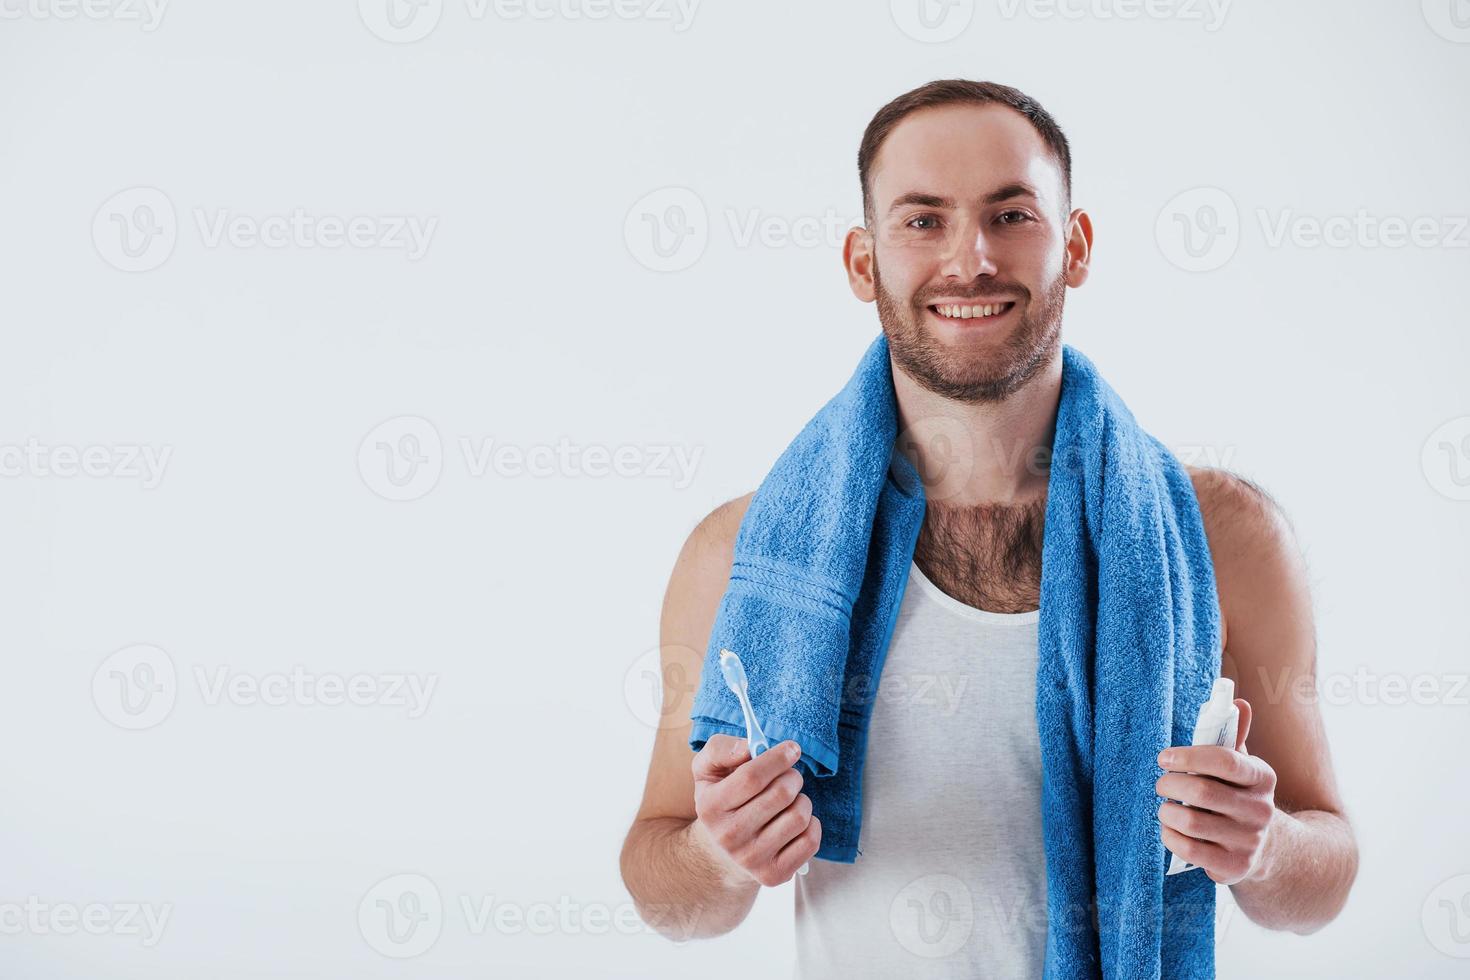 Toothbruh in hand. Man with blue towel stands against white background in the studio photo